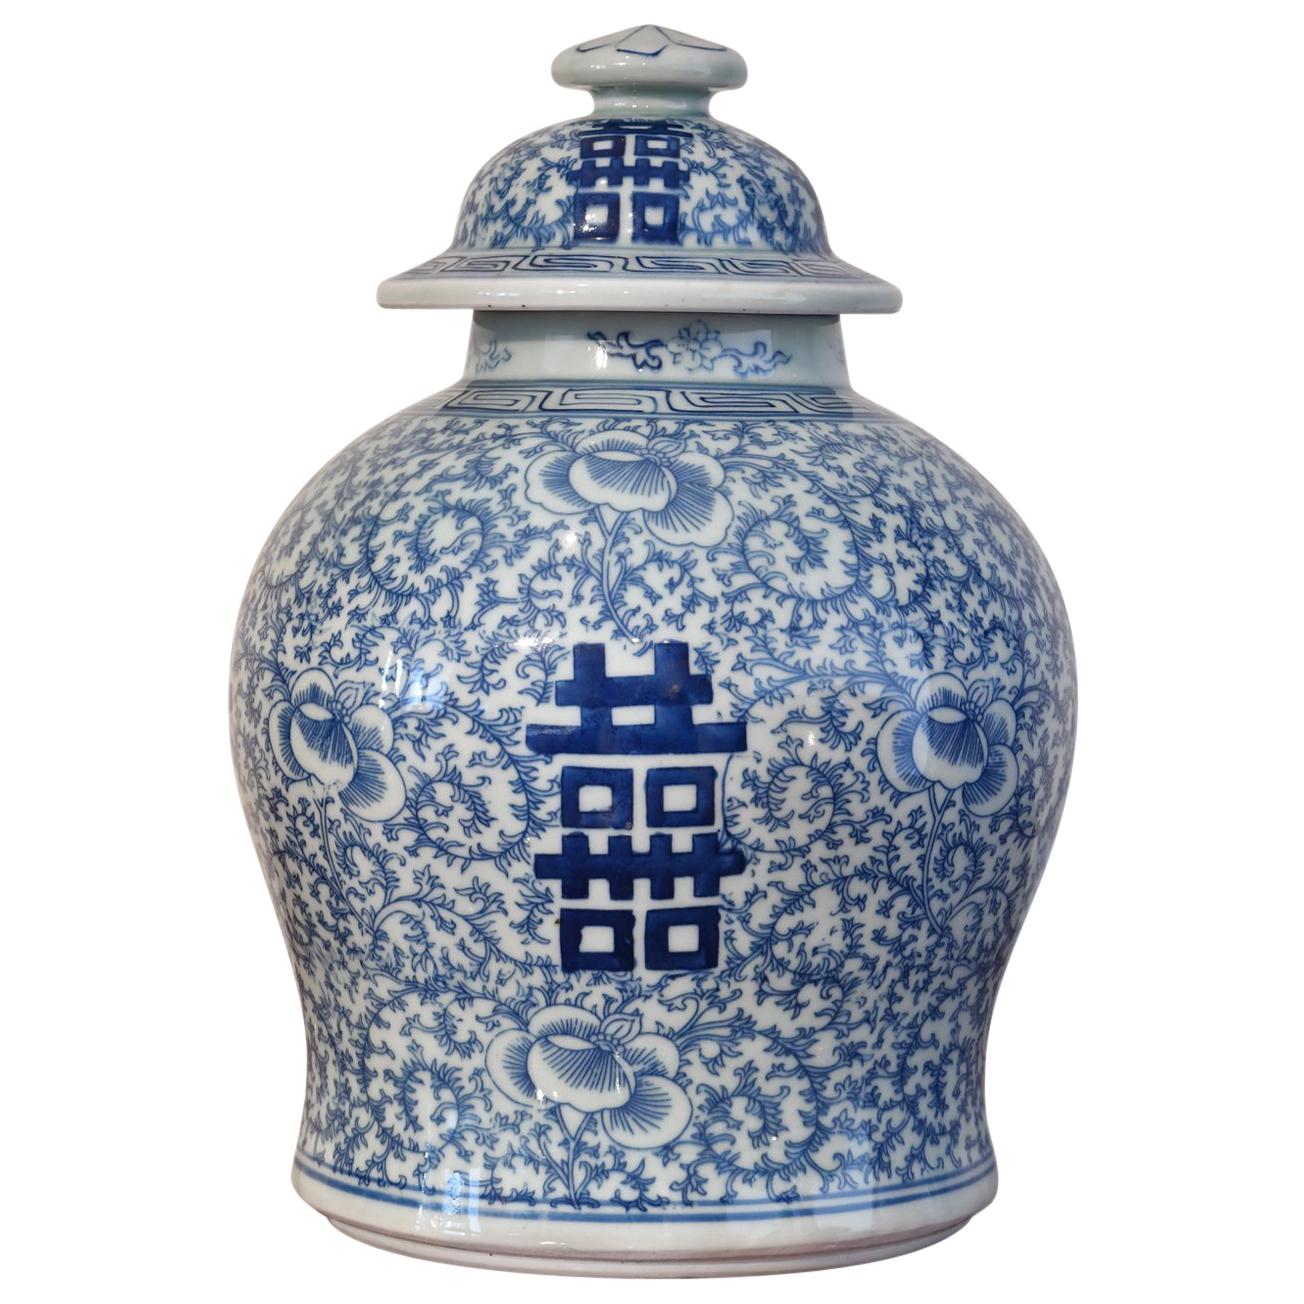 Qing Chinese Porcelain Blue & White Lidded Jar w/ Shuang-xi or Double Happiness For Sale